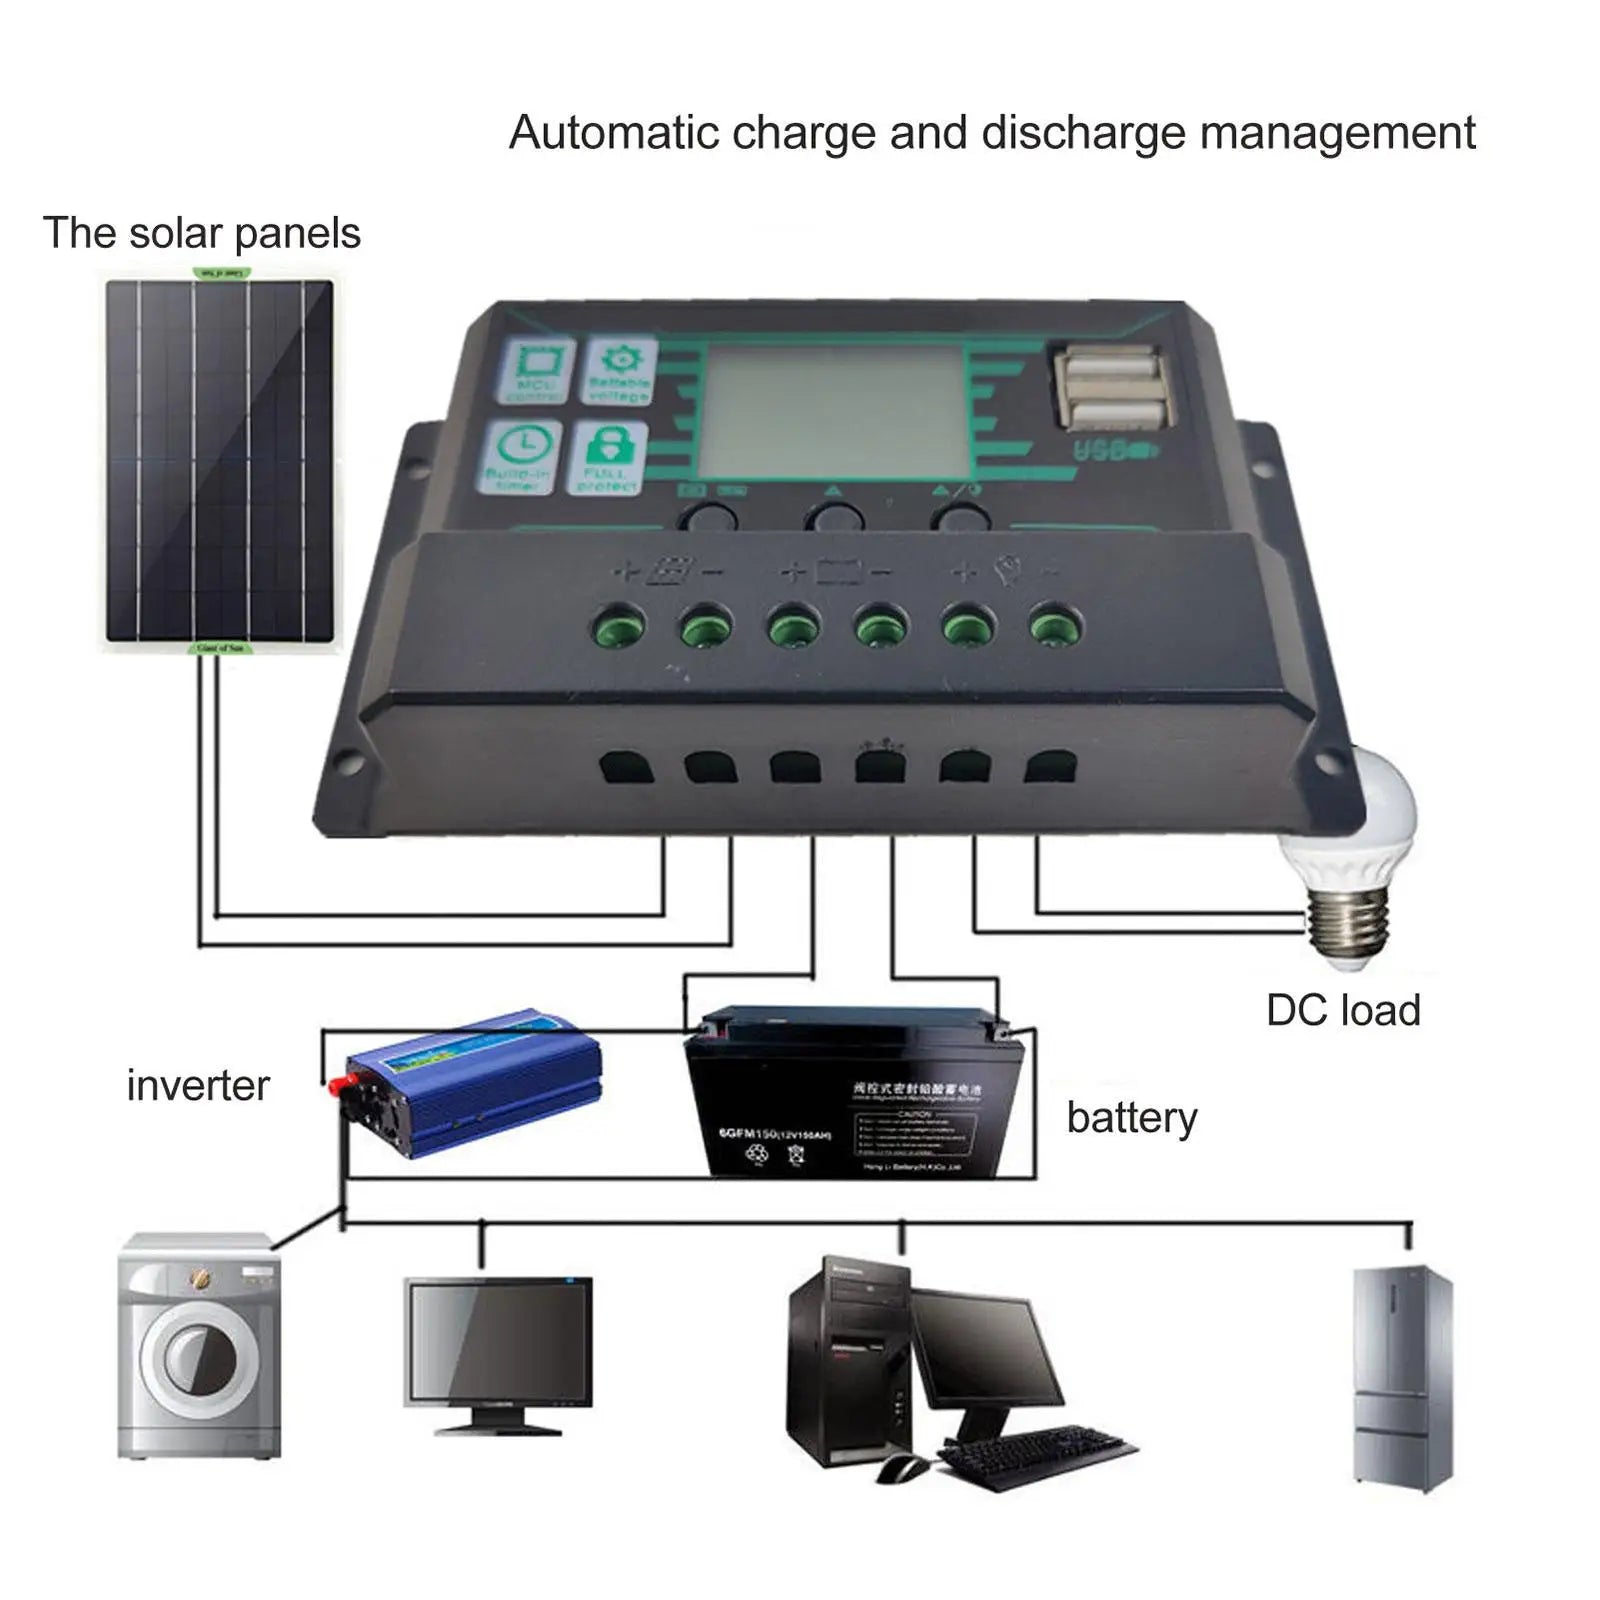 MPPT 10/20/30/60/100A Solar Charge Controller, Smart charging/discharging system for solar panels and batteries for efficient energy management.